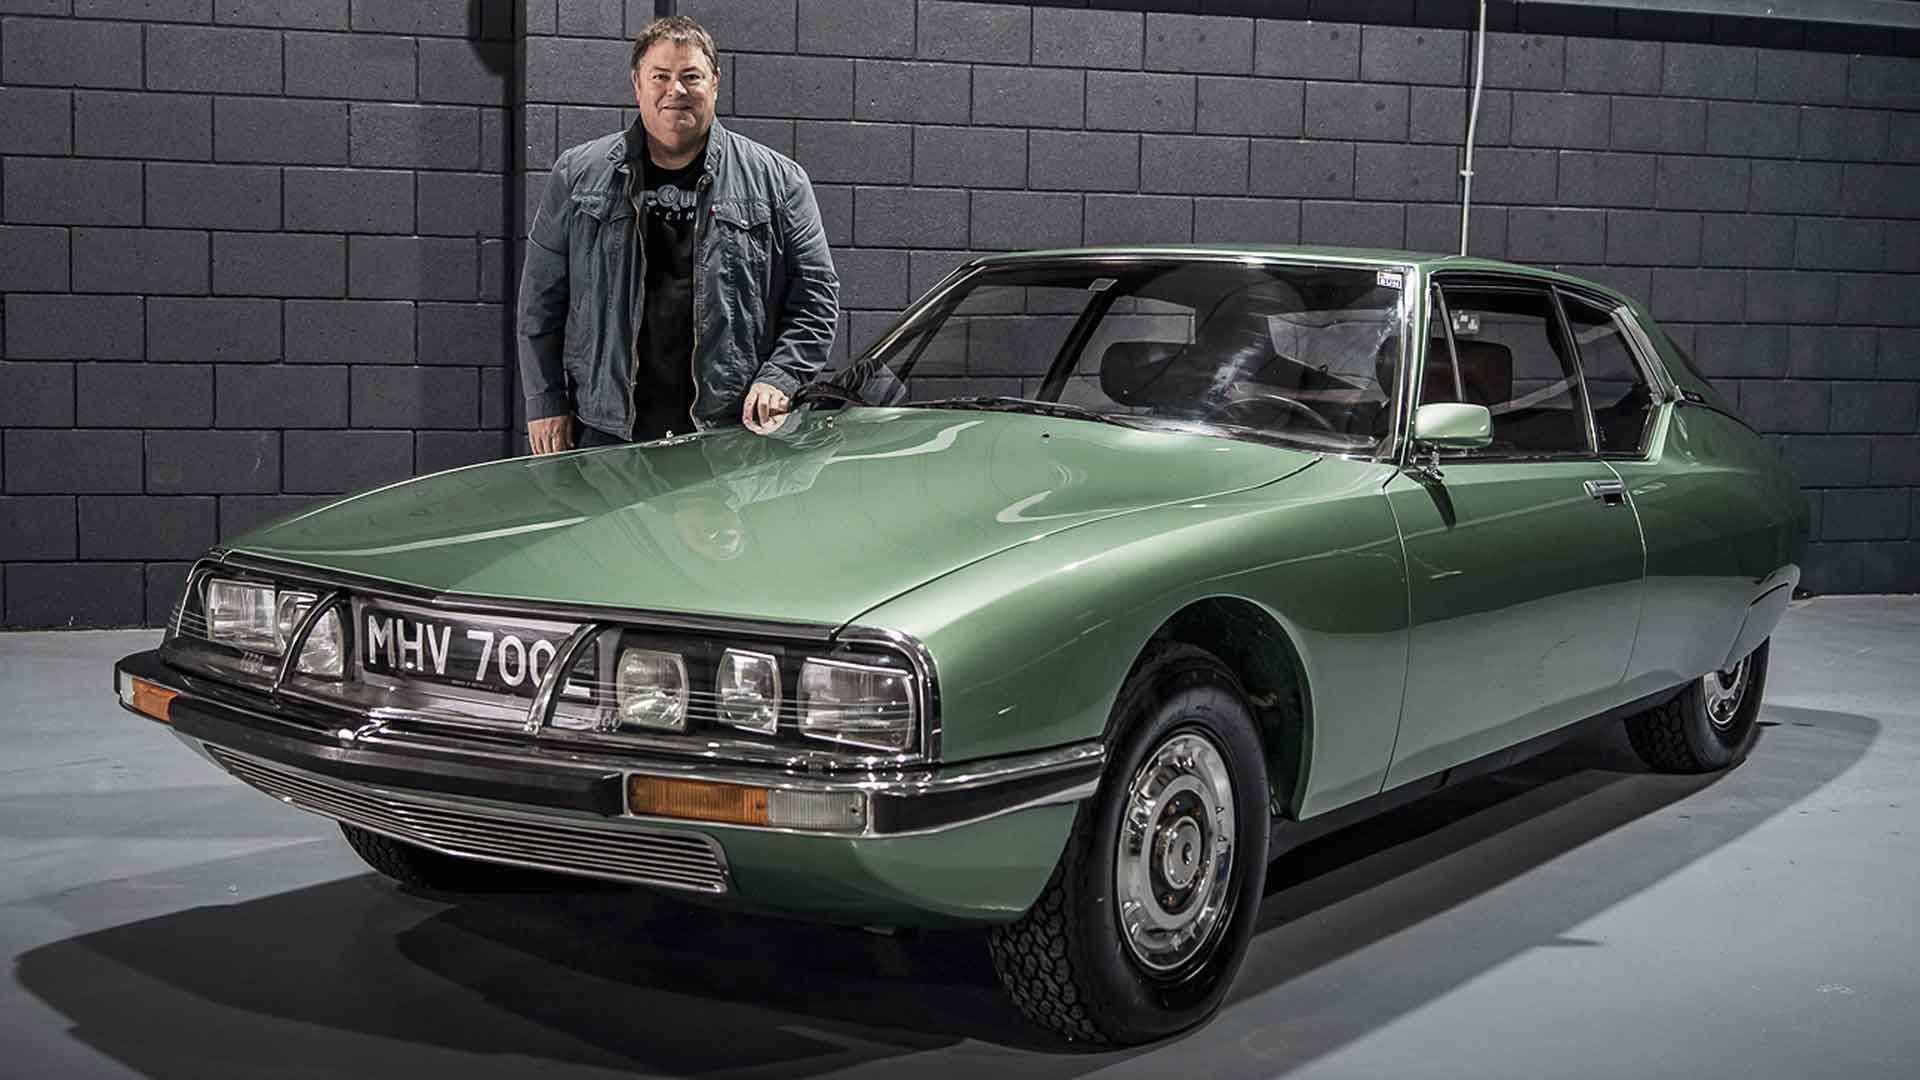 The Mike Brewer Collection